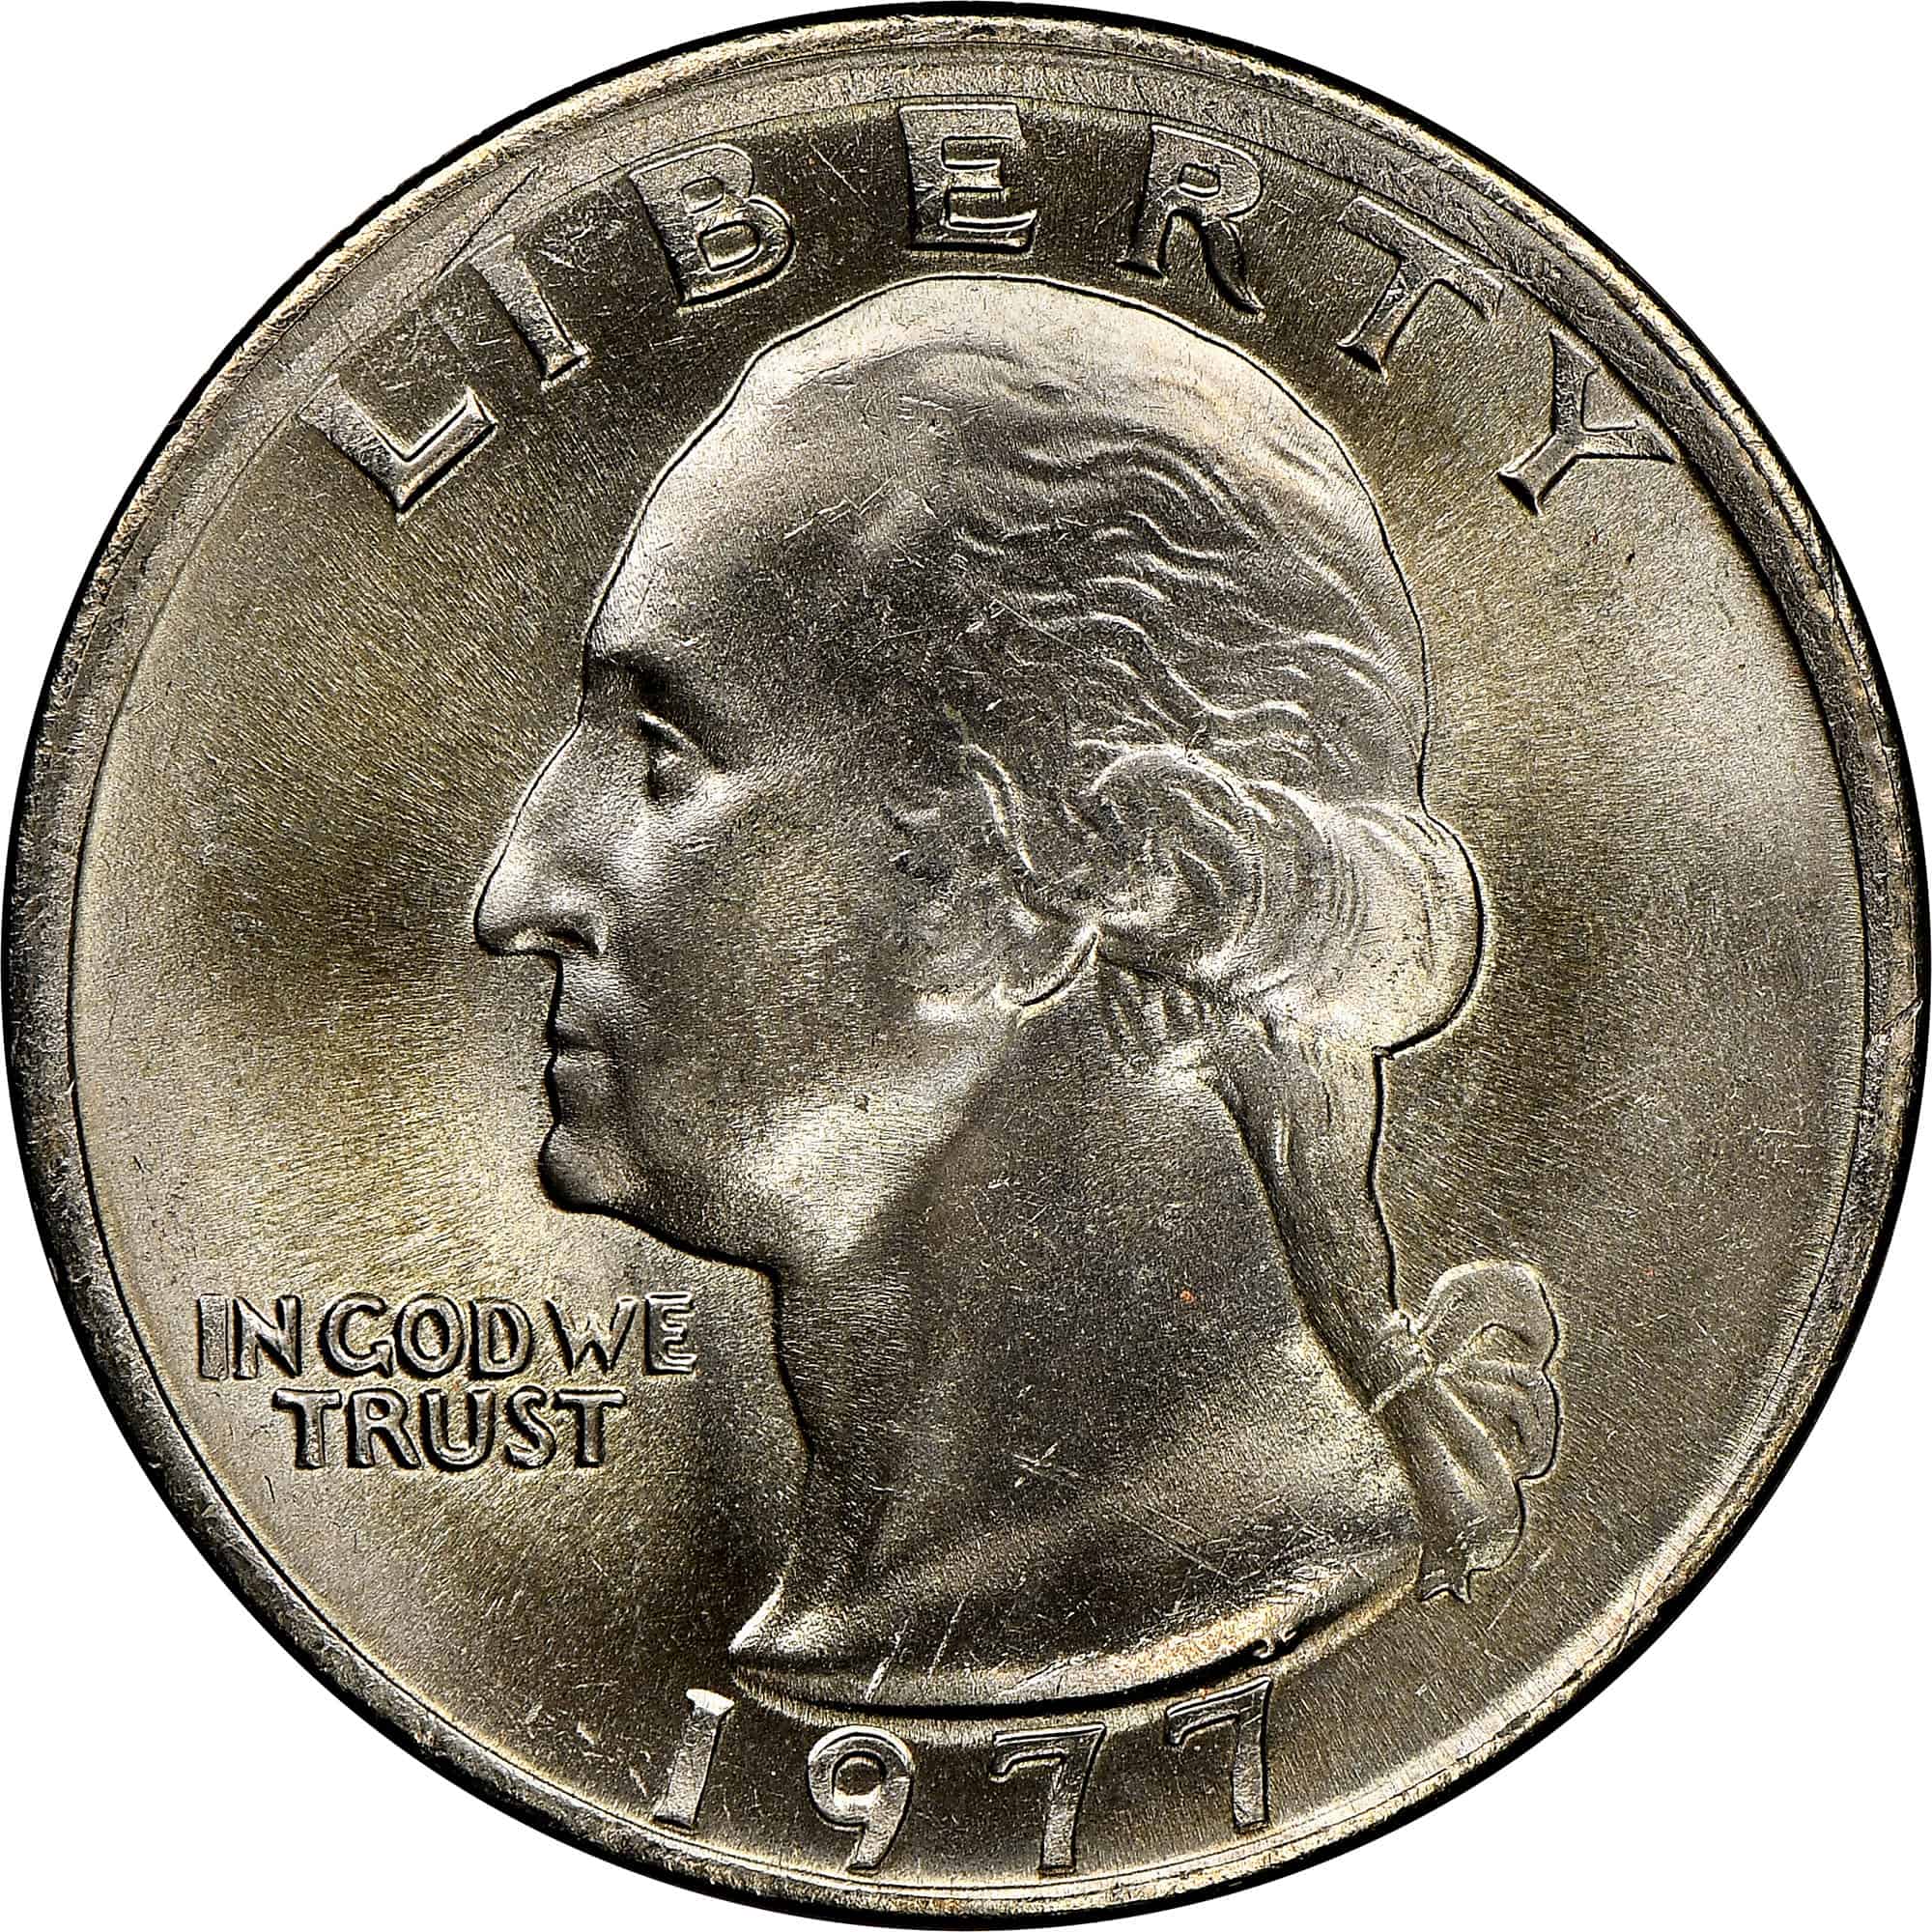 The Obverse of the 1977 Quarter